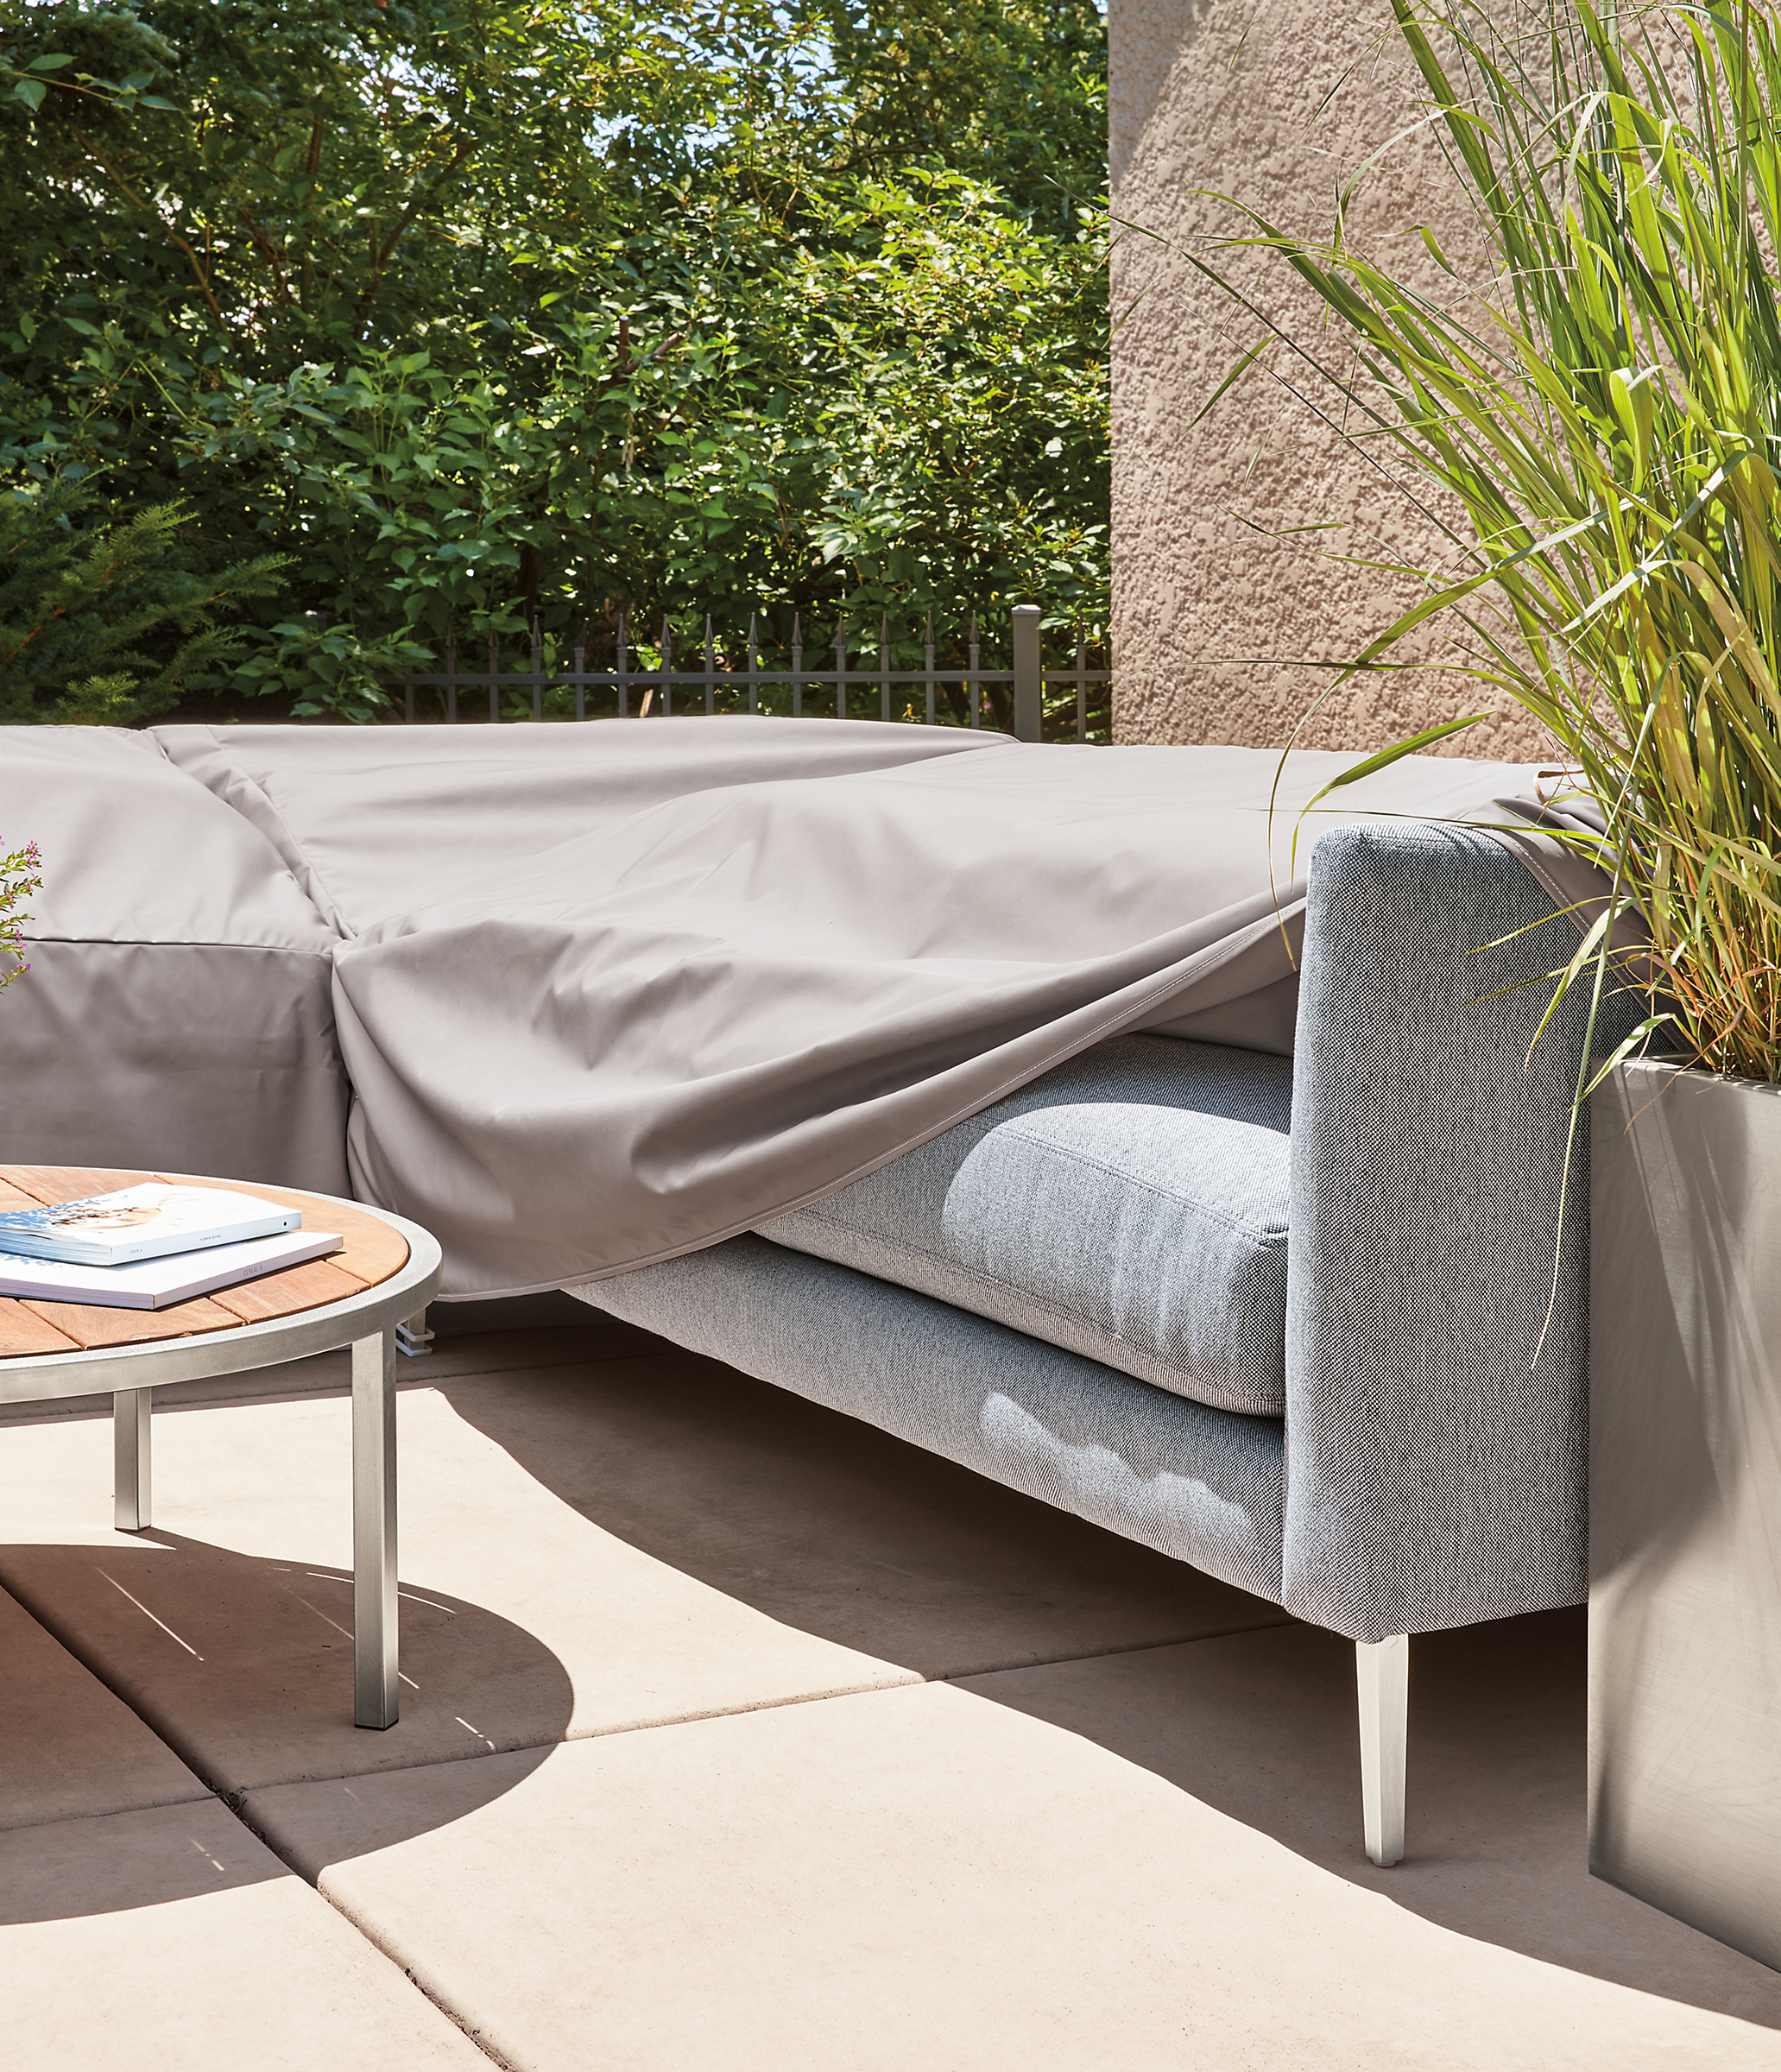 Outdoor patio setting with a Palm sectional and Outdoor Cover.